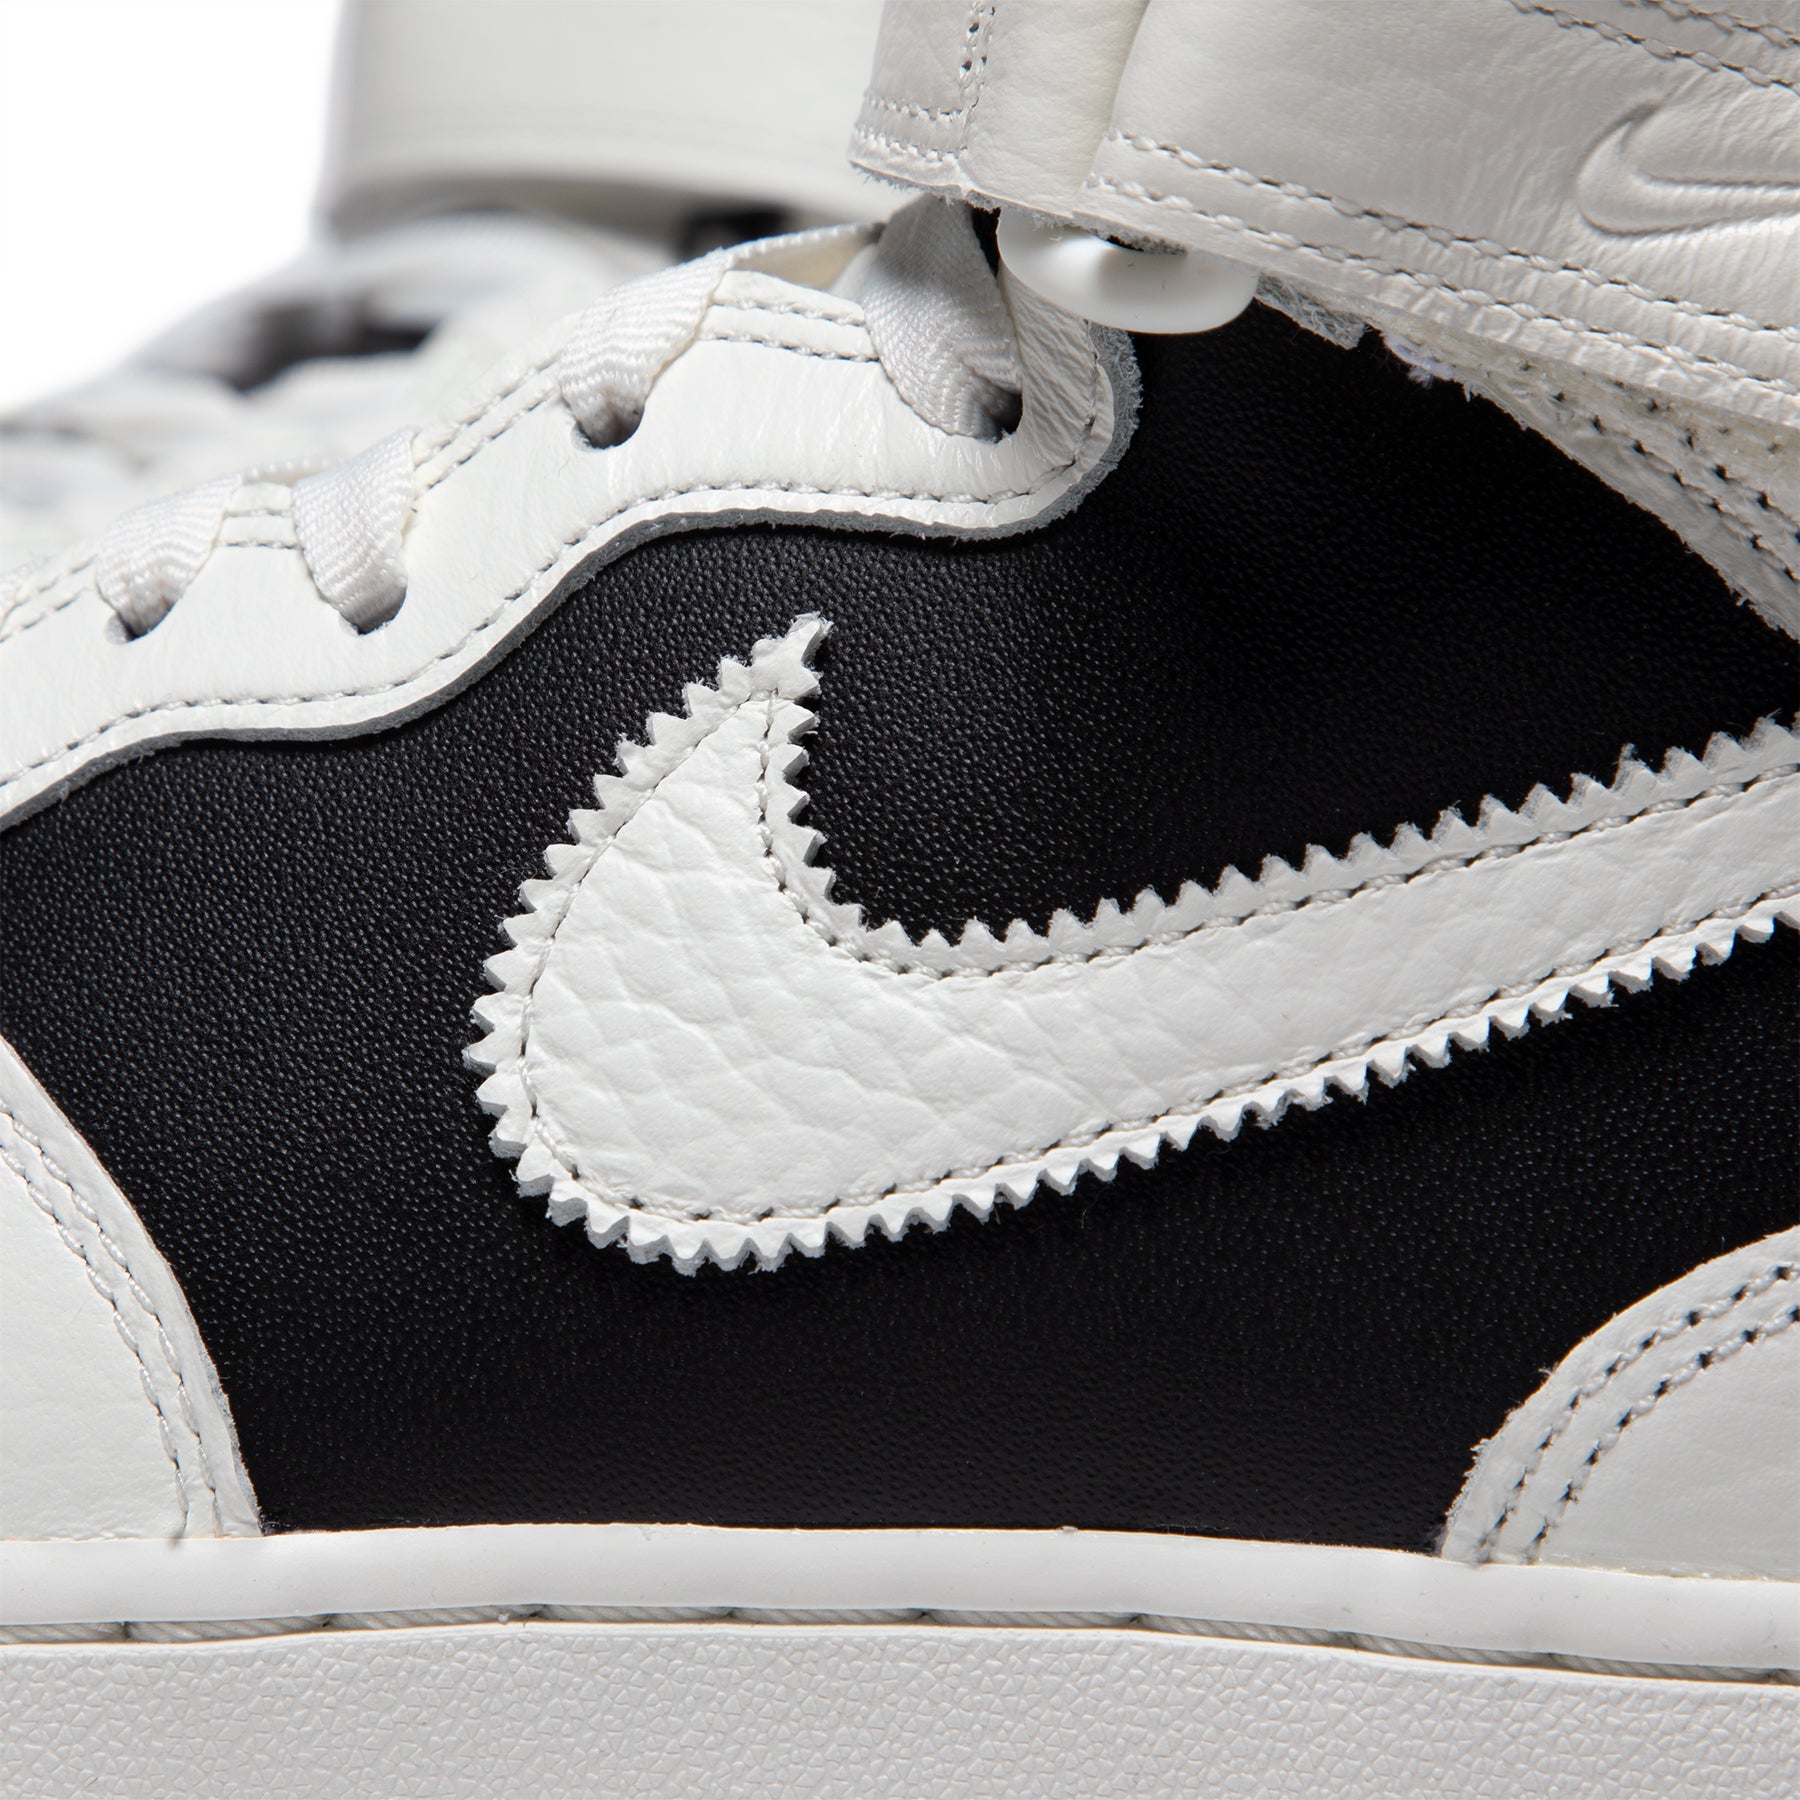 Nike Air Force 1 Mid '07 Lv8 'Black/Coconut Milk-Light Silver' The